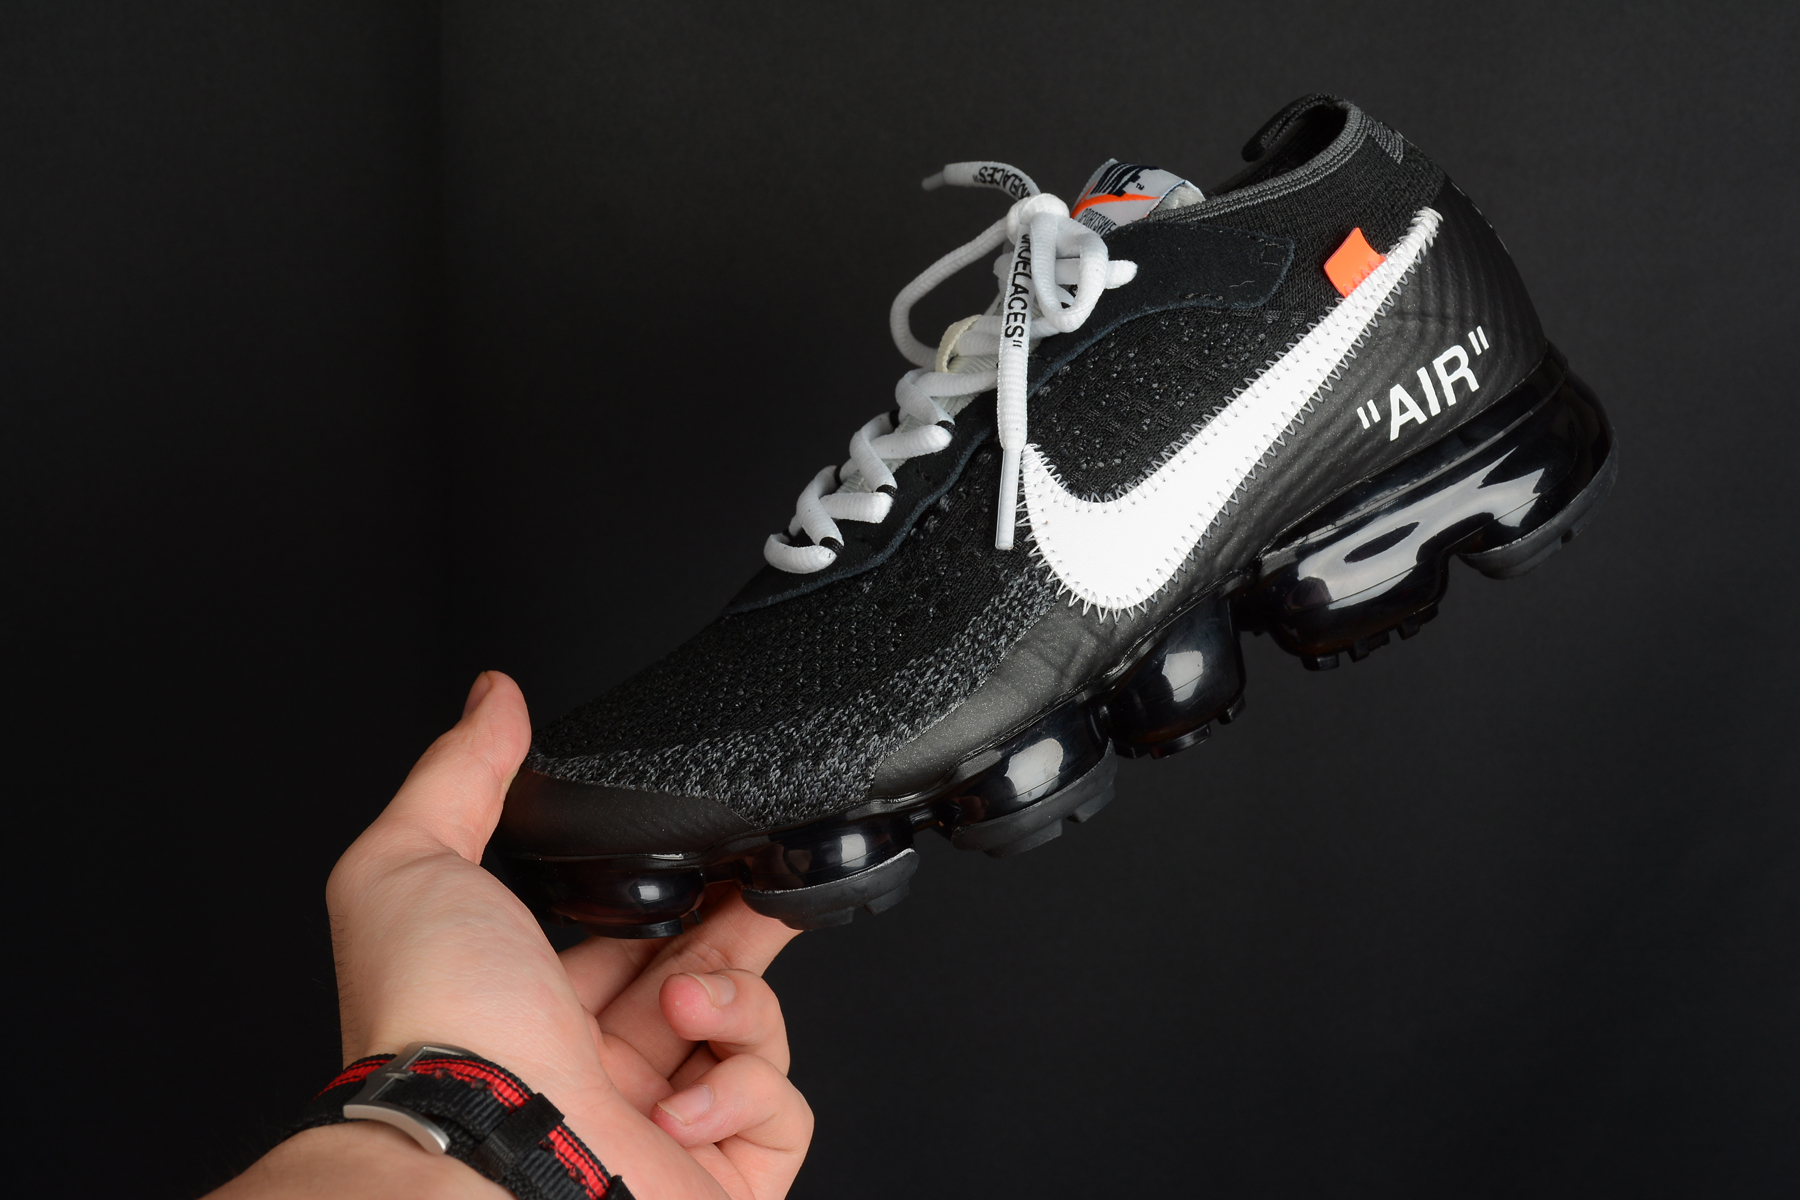 001 - 2018 Off White X Nike Air Max Vapormax Running Shoes Black AA3831 - women leopard nike air future run for kids youtube channel - GmarShops